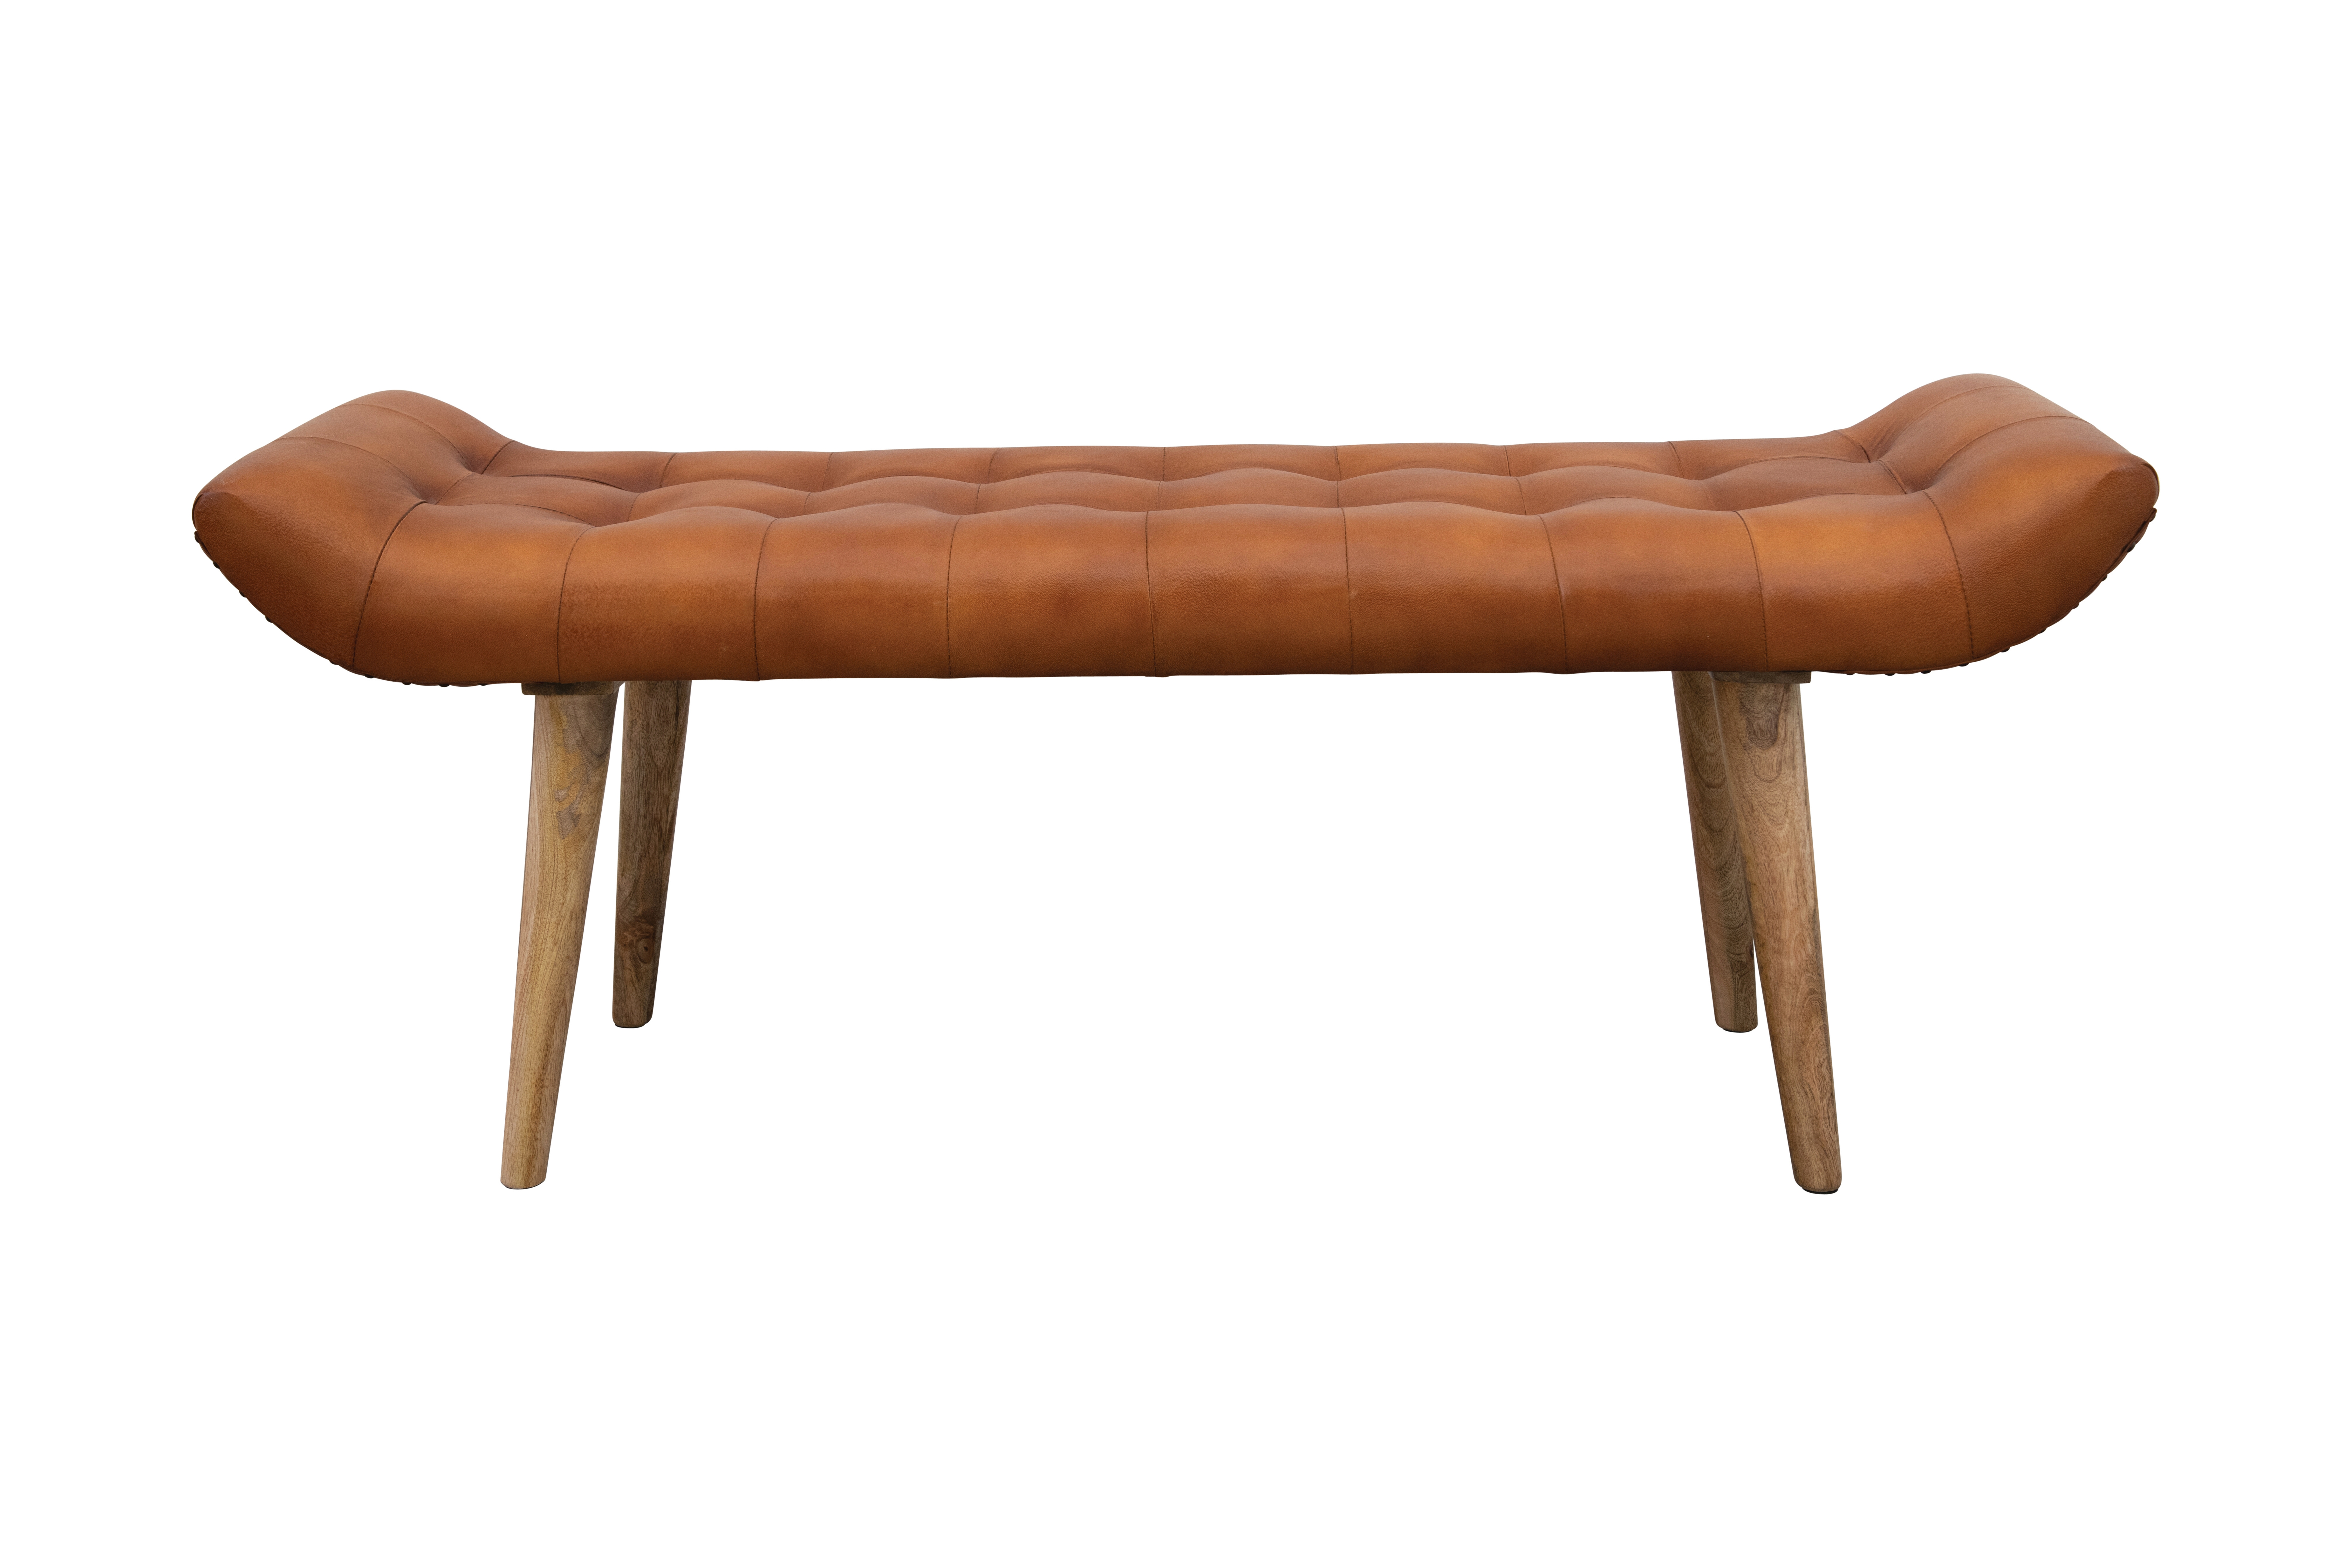 Leather Tufted Bench with Mango Wood Legs - Nomad Home